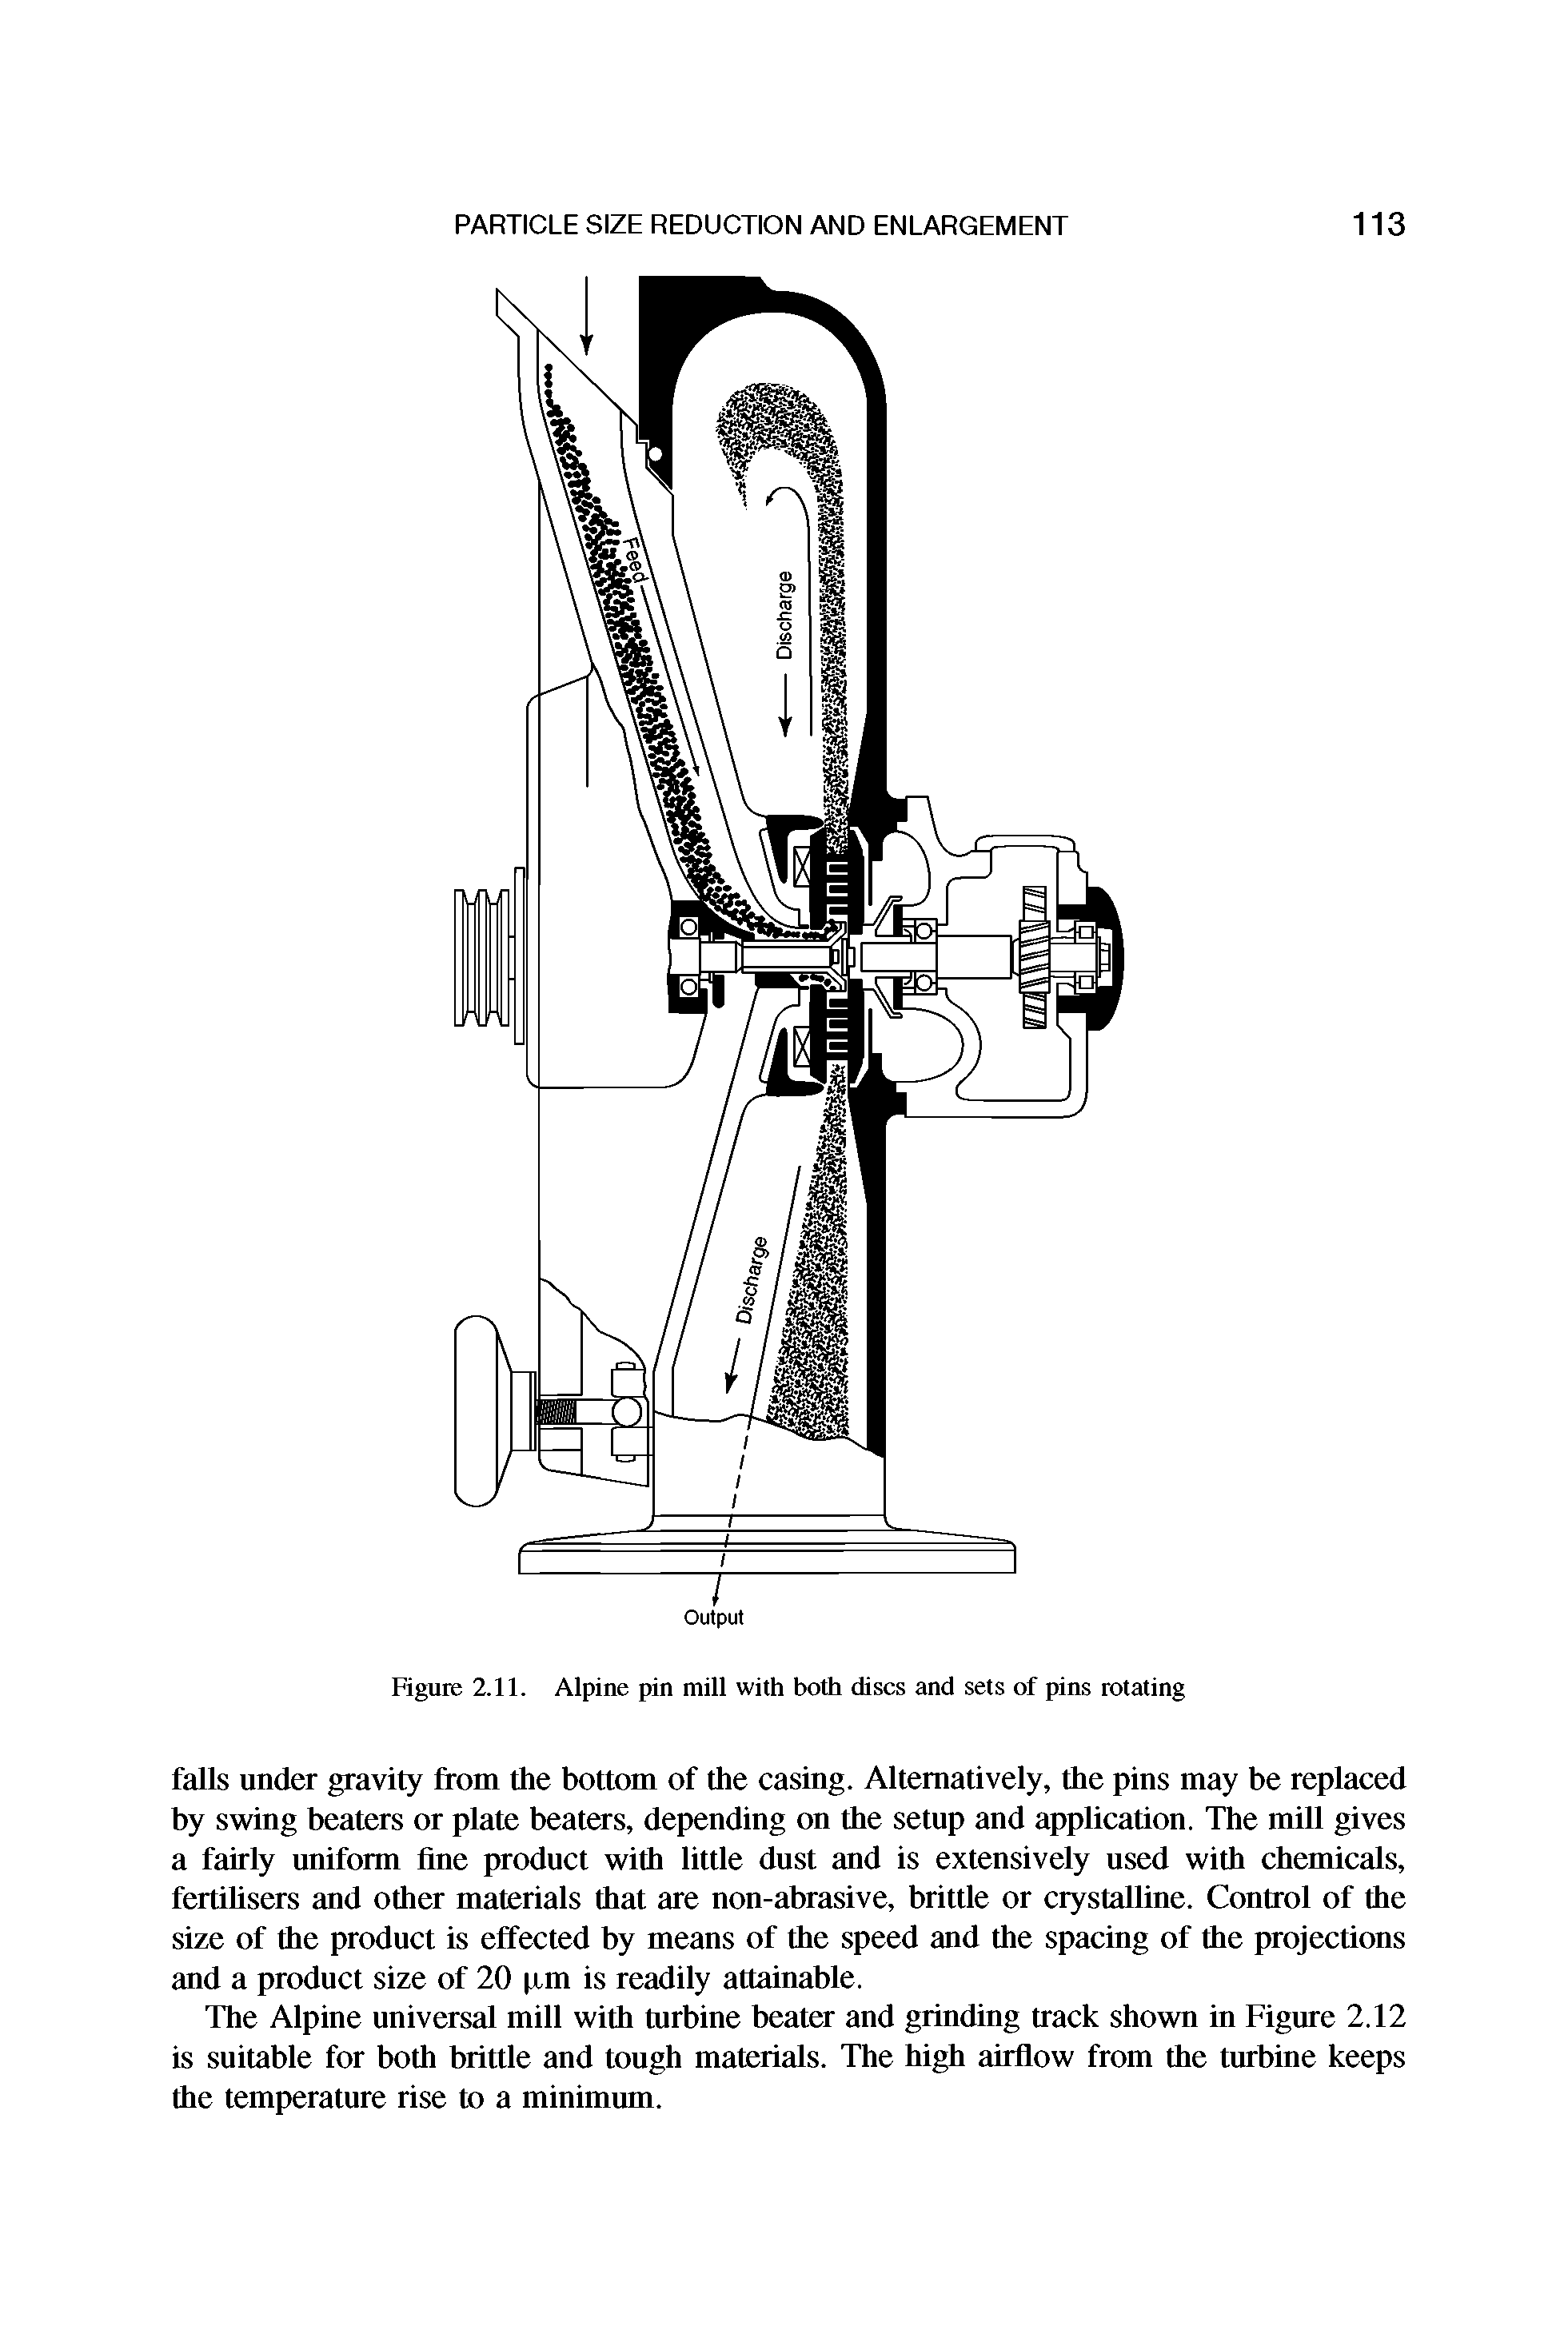 Figure 2.11. Alpine pin mill with both discs and sets of pins rotating...